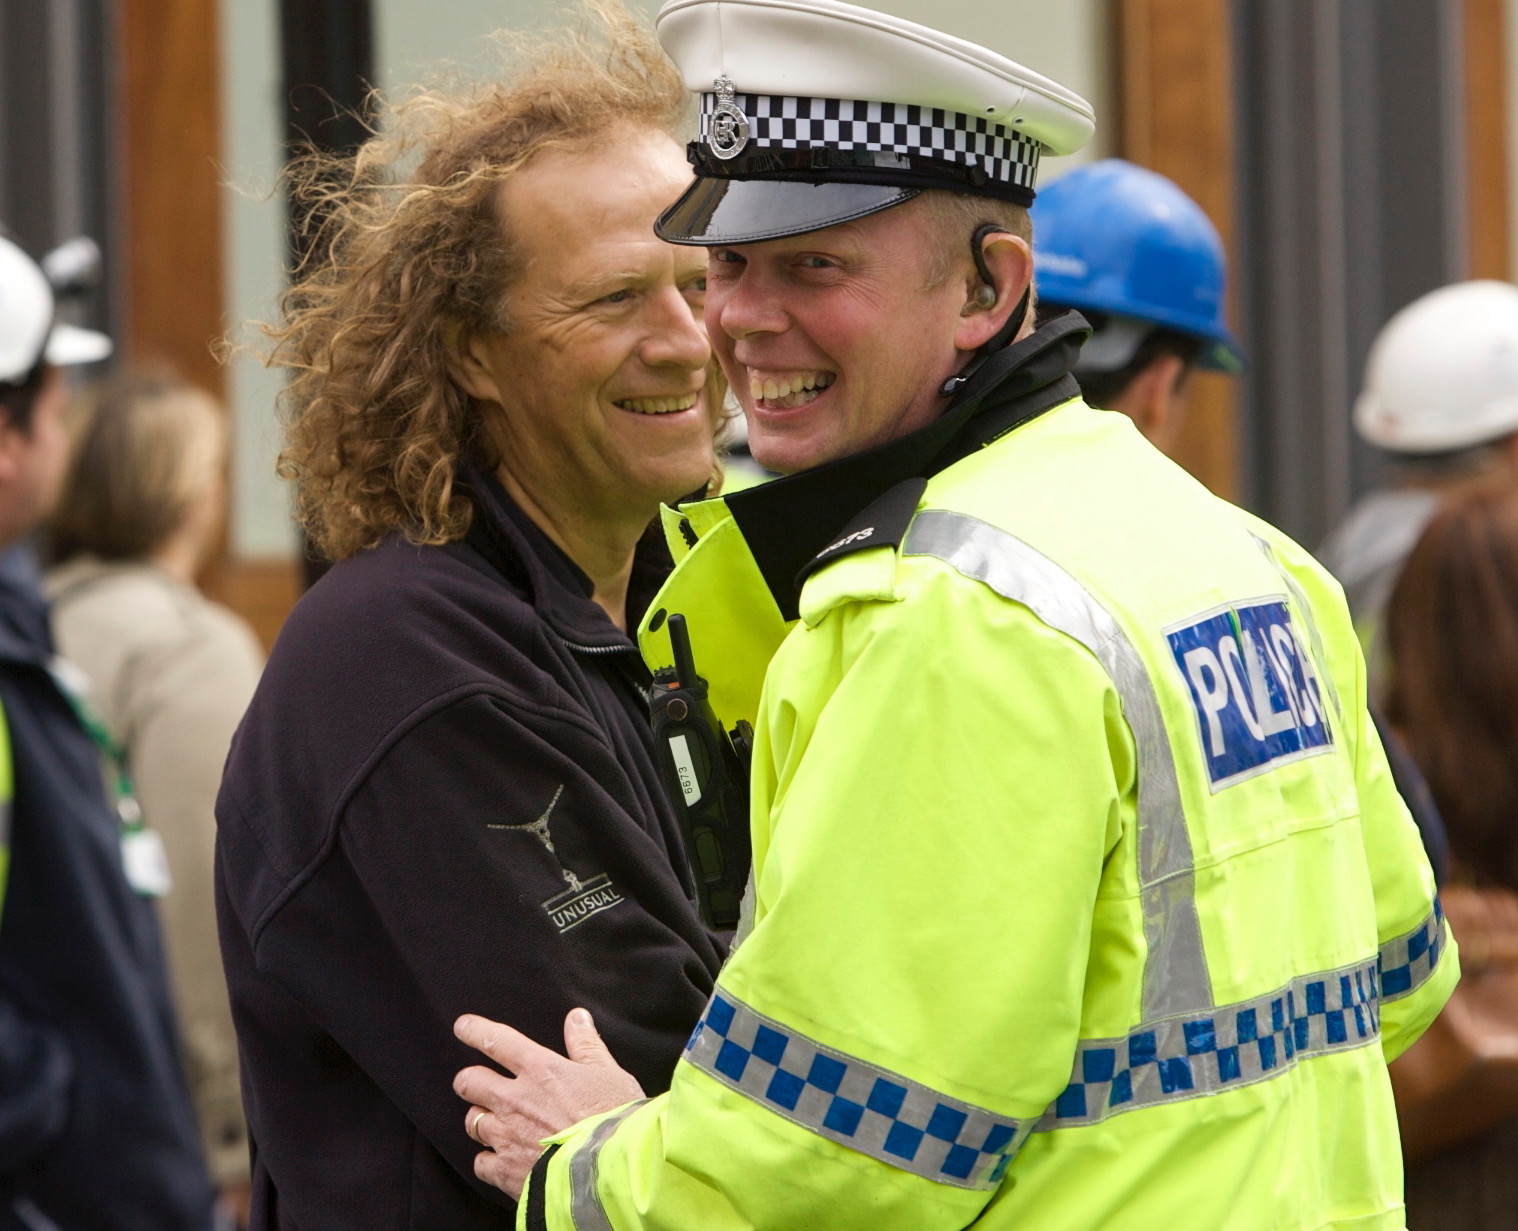 Police man smiling in the foreground and Alan Jacobi standing behind smiling.